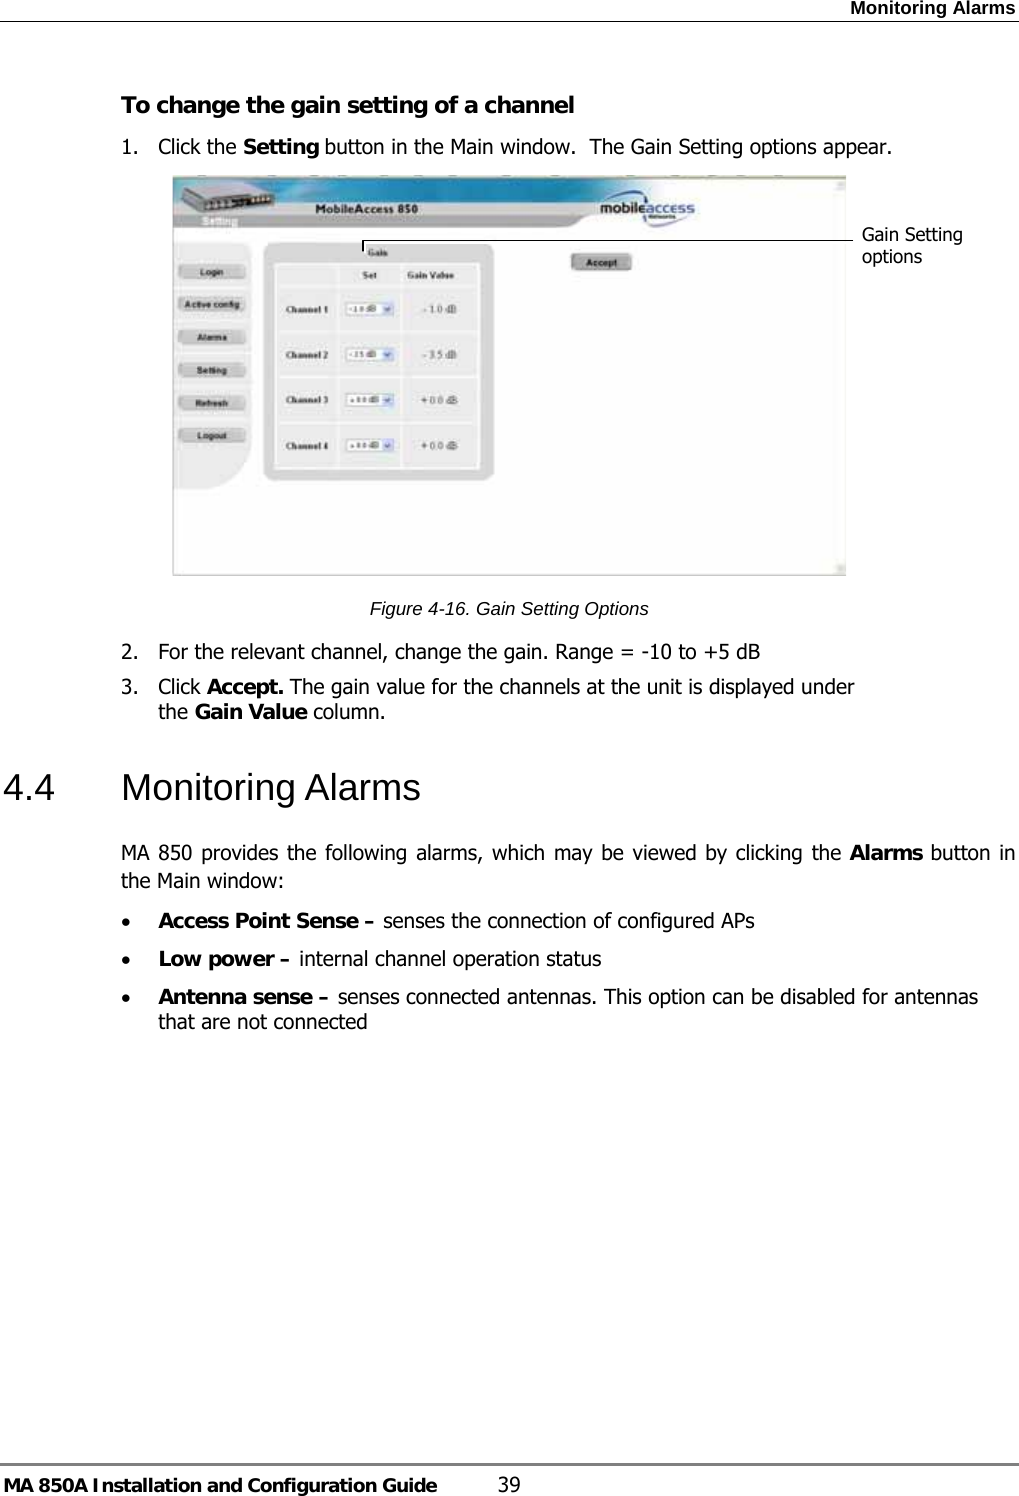 Monitoring Alarms MA 850A Installation and Configuration Guide  39 To change the gain setting of a channel 1. Click the Setting button in the Main window.  The Gain Setting options appear.  Figure  4-16. Gain Setting Options 2. For the relevant channel, change the gain. Range = -10 to +5 dB 3. Click Accept. The gain value for the channels at the unit is displayed under the Gain Value column. 4.4 Monitoring Alarms MA 850 provides the following alarms, which may be viewed by clicking the Alarms button in the Main window:  • Access Point Sense – senses the connection of configured APs • Low power – internal channel operation status • Antenna sense – senses connected antennas. This option can be disabled for antennas that are not connected  Gain Setting options 